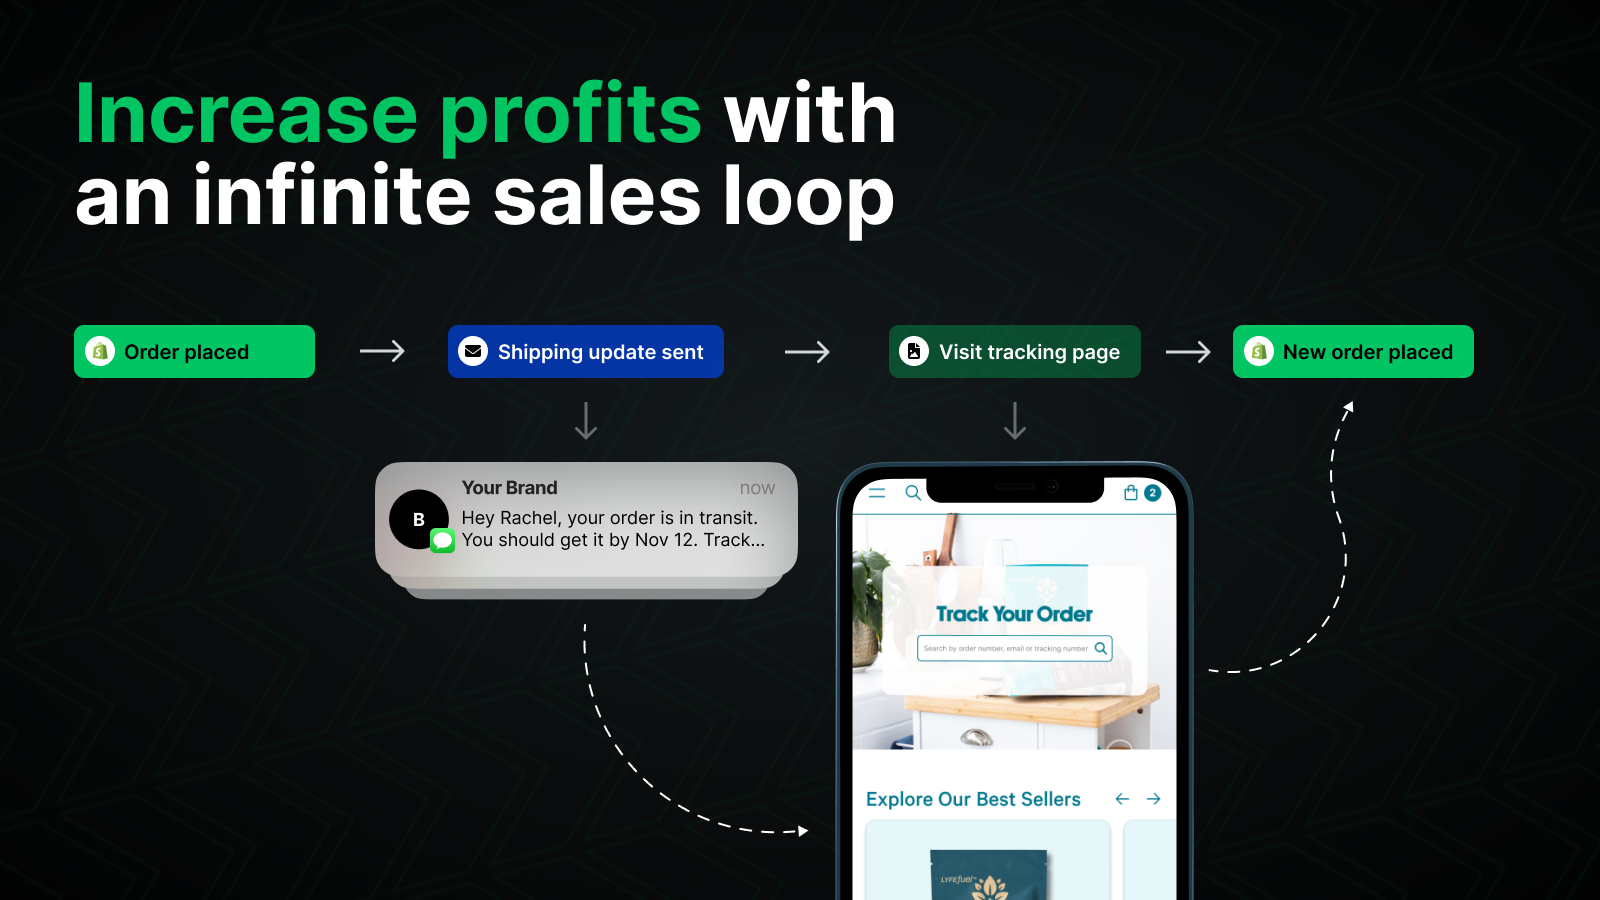 Drive repeat sales from tracking page & notifications